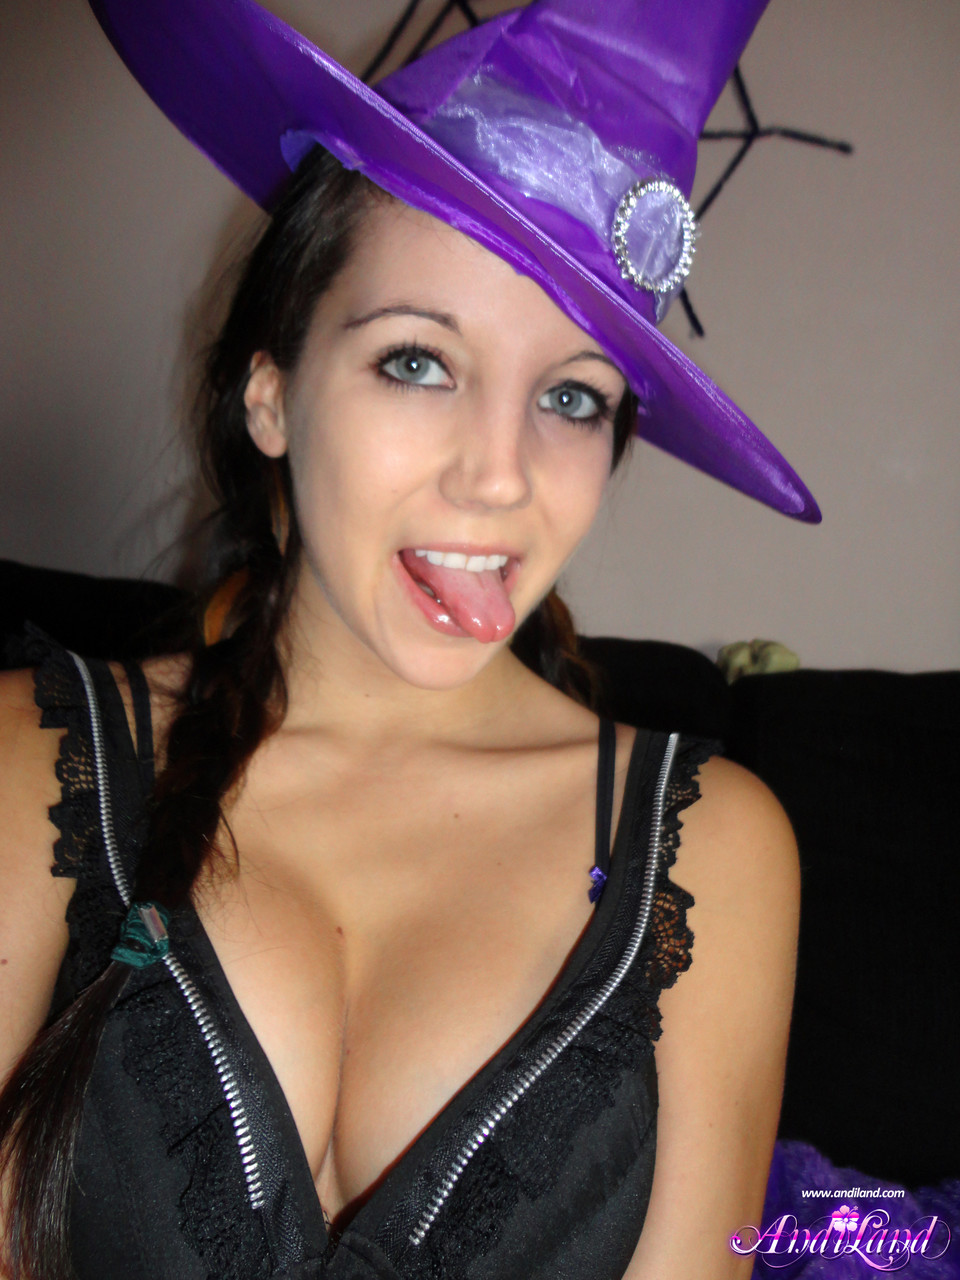 Teen amateur Andi Land teases during upskirt action in a Halloween outfit porn photo #428432669